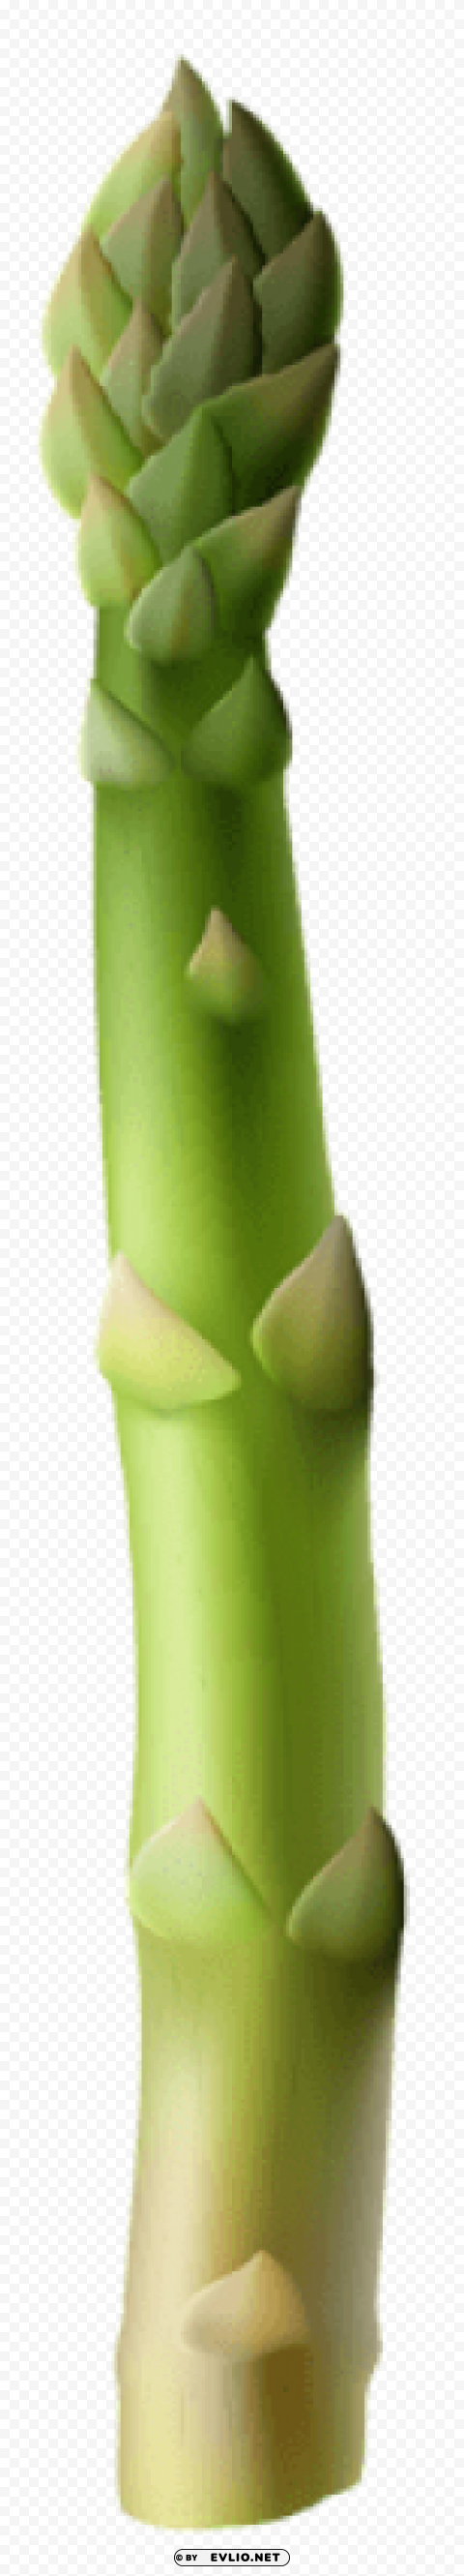 asparagus Free PNG images with alpha transparency